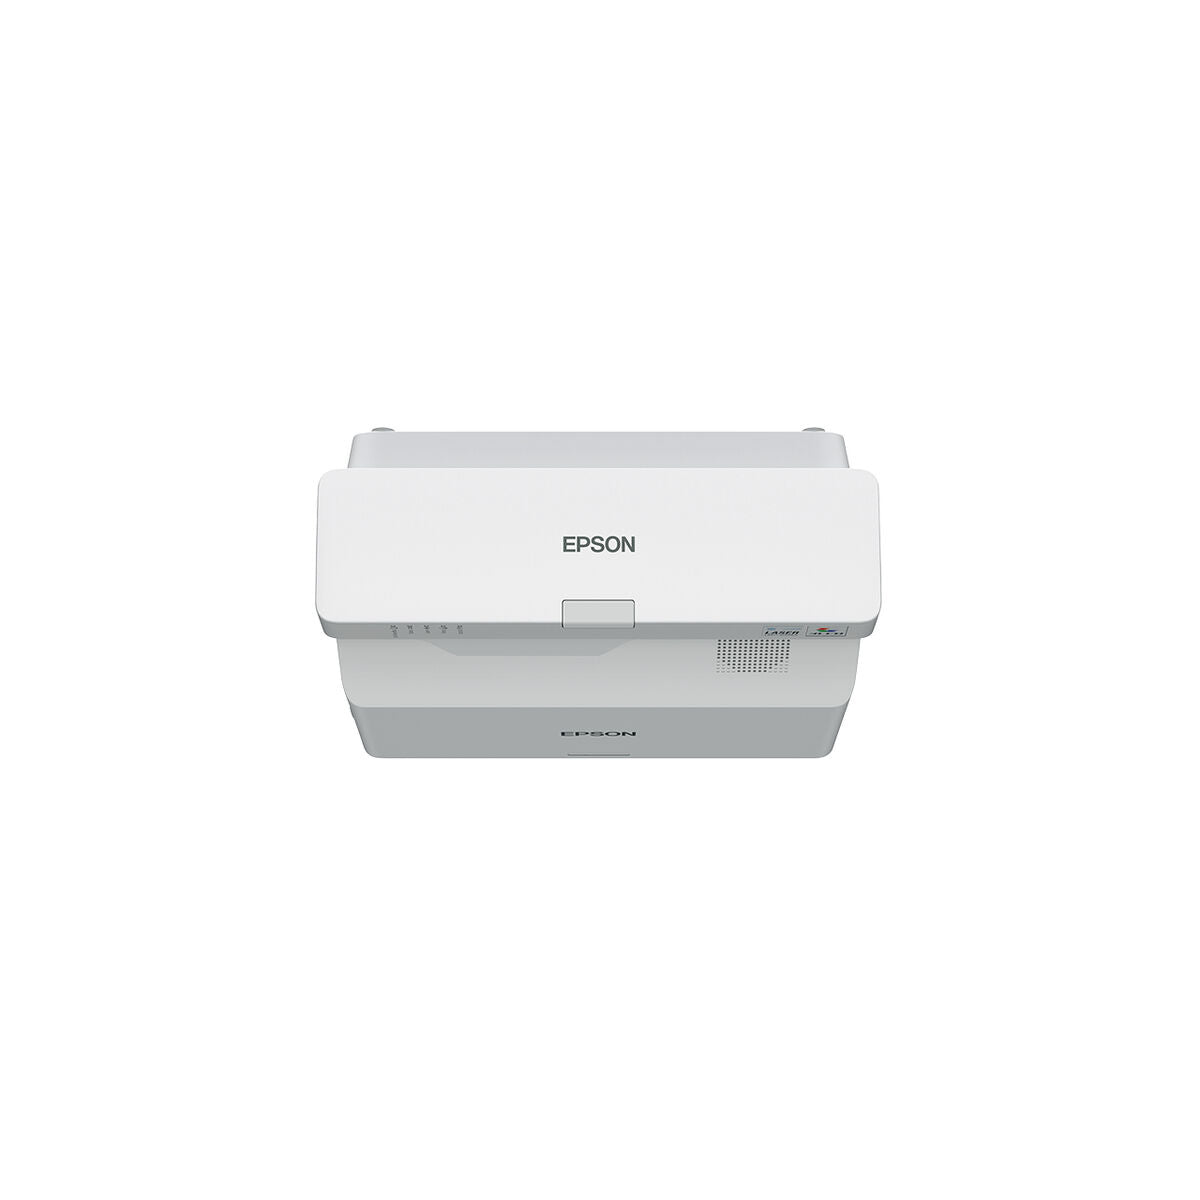 Projector Epson V11HA78080 Full HD 4100 Lm 1920 x 1080 px, Epson, Electronics, TV, Video and home cinema, projector-epson-v11ha78080-full-hd-4100-lm-1920-x-1080-px, Brand_Epson, category-reference-2609, category-reference-2642, category-reference-2947, category-reference-t-18805, category-reference-t-18811, category-reference-t-19653, cinema and television, computers / peripherals, Condition_NEW, entertainment, office, Price_+ 1000, RiotNook